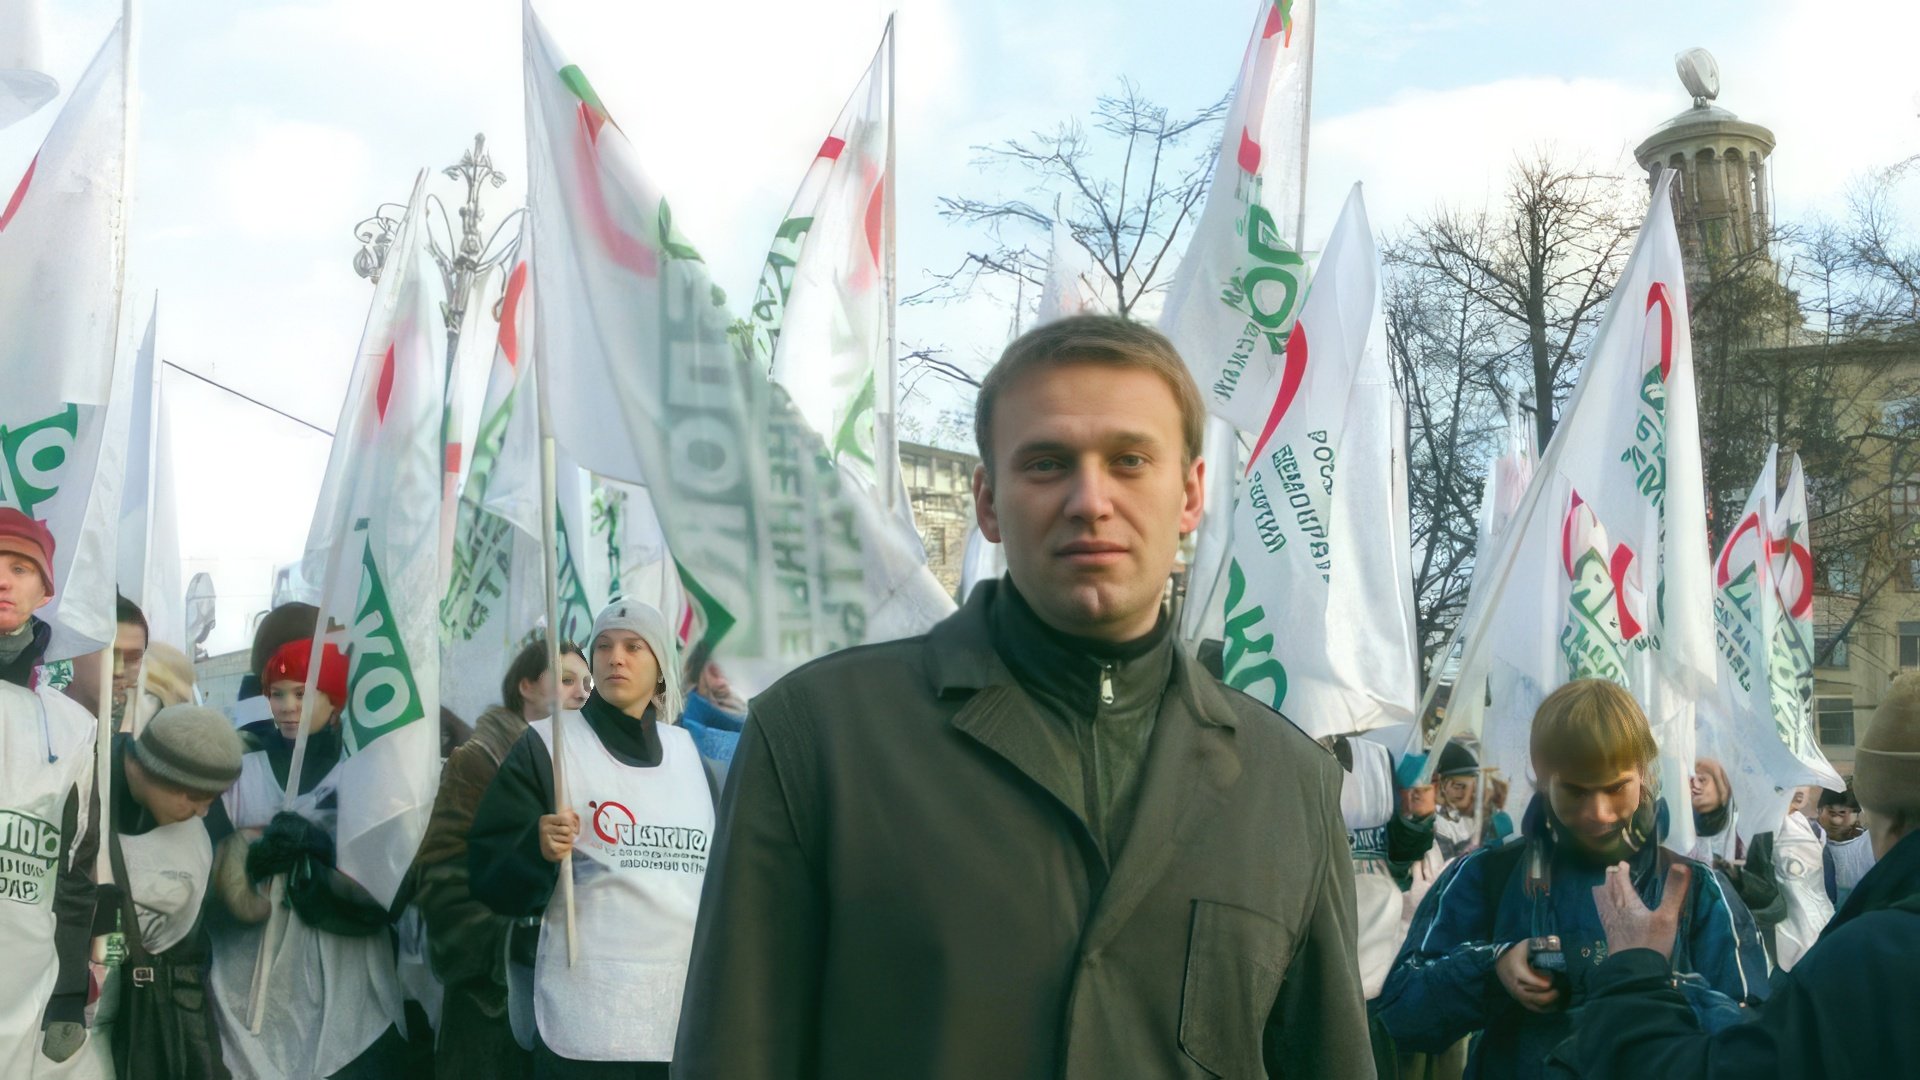 Alexey Navalny was a member of the Yabloko party